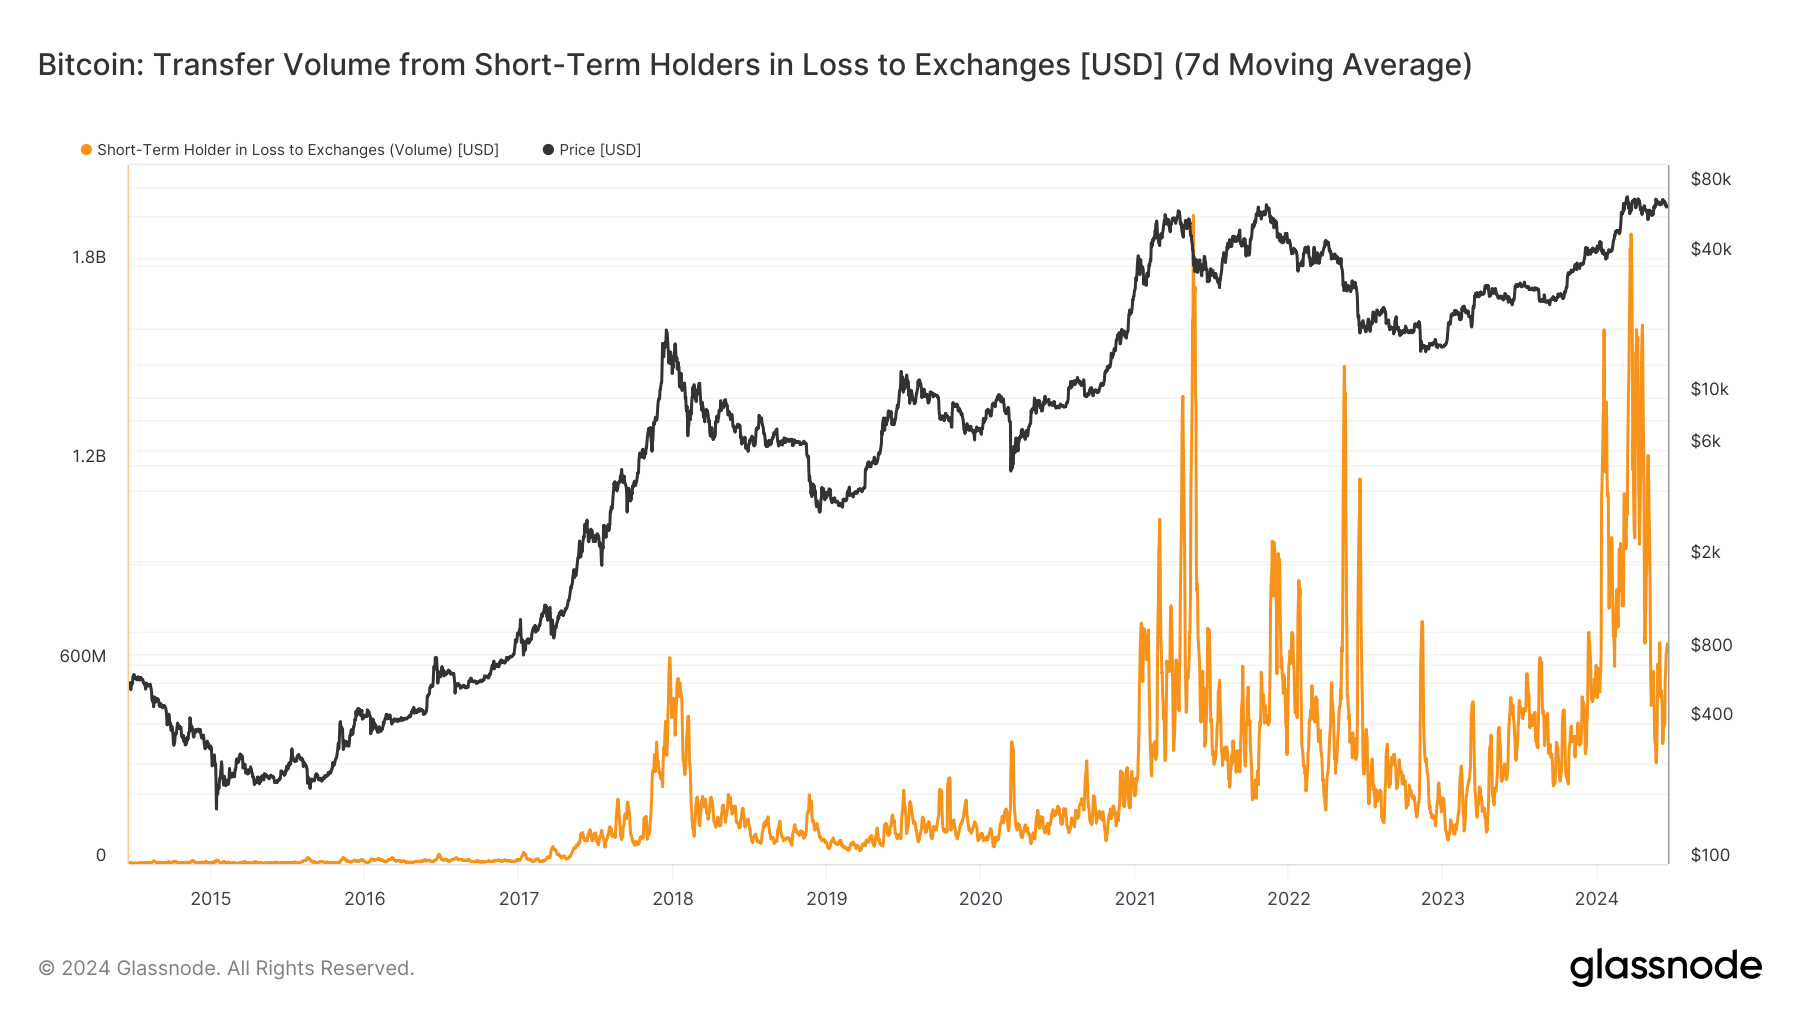 Bitcoin sell-offs by short-term holders peak in May, but resilience grows